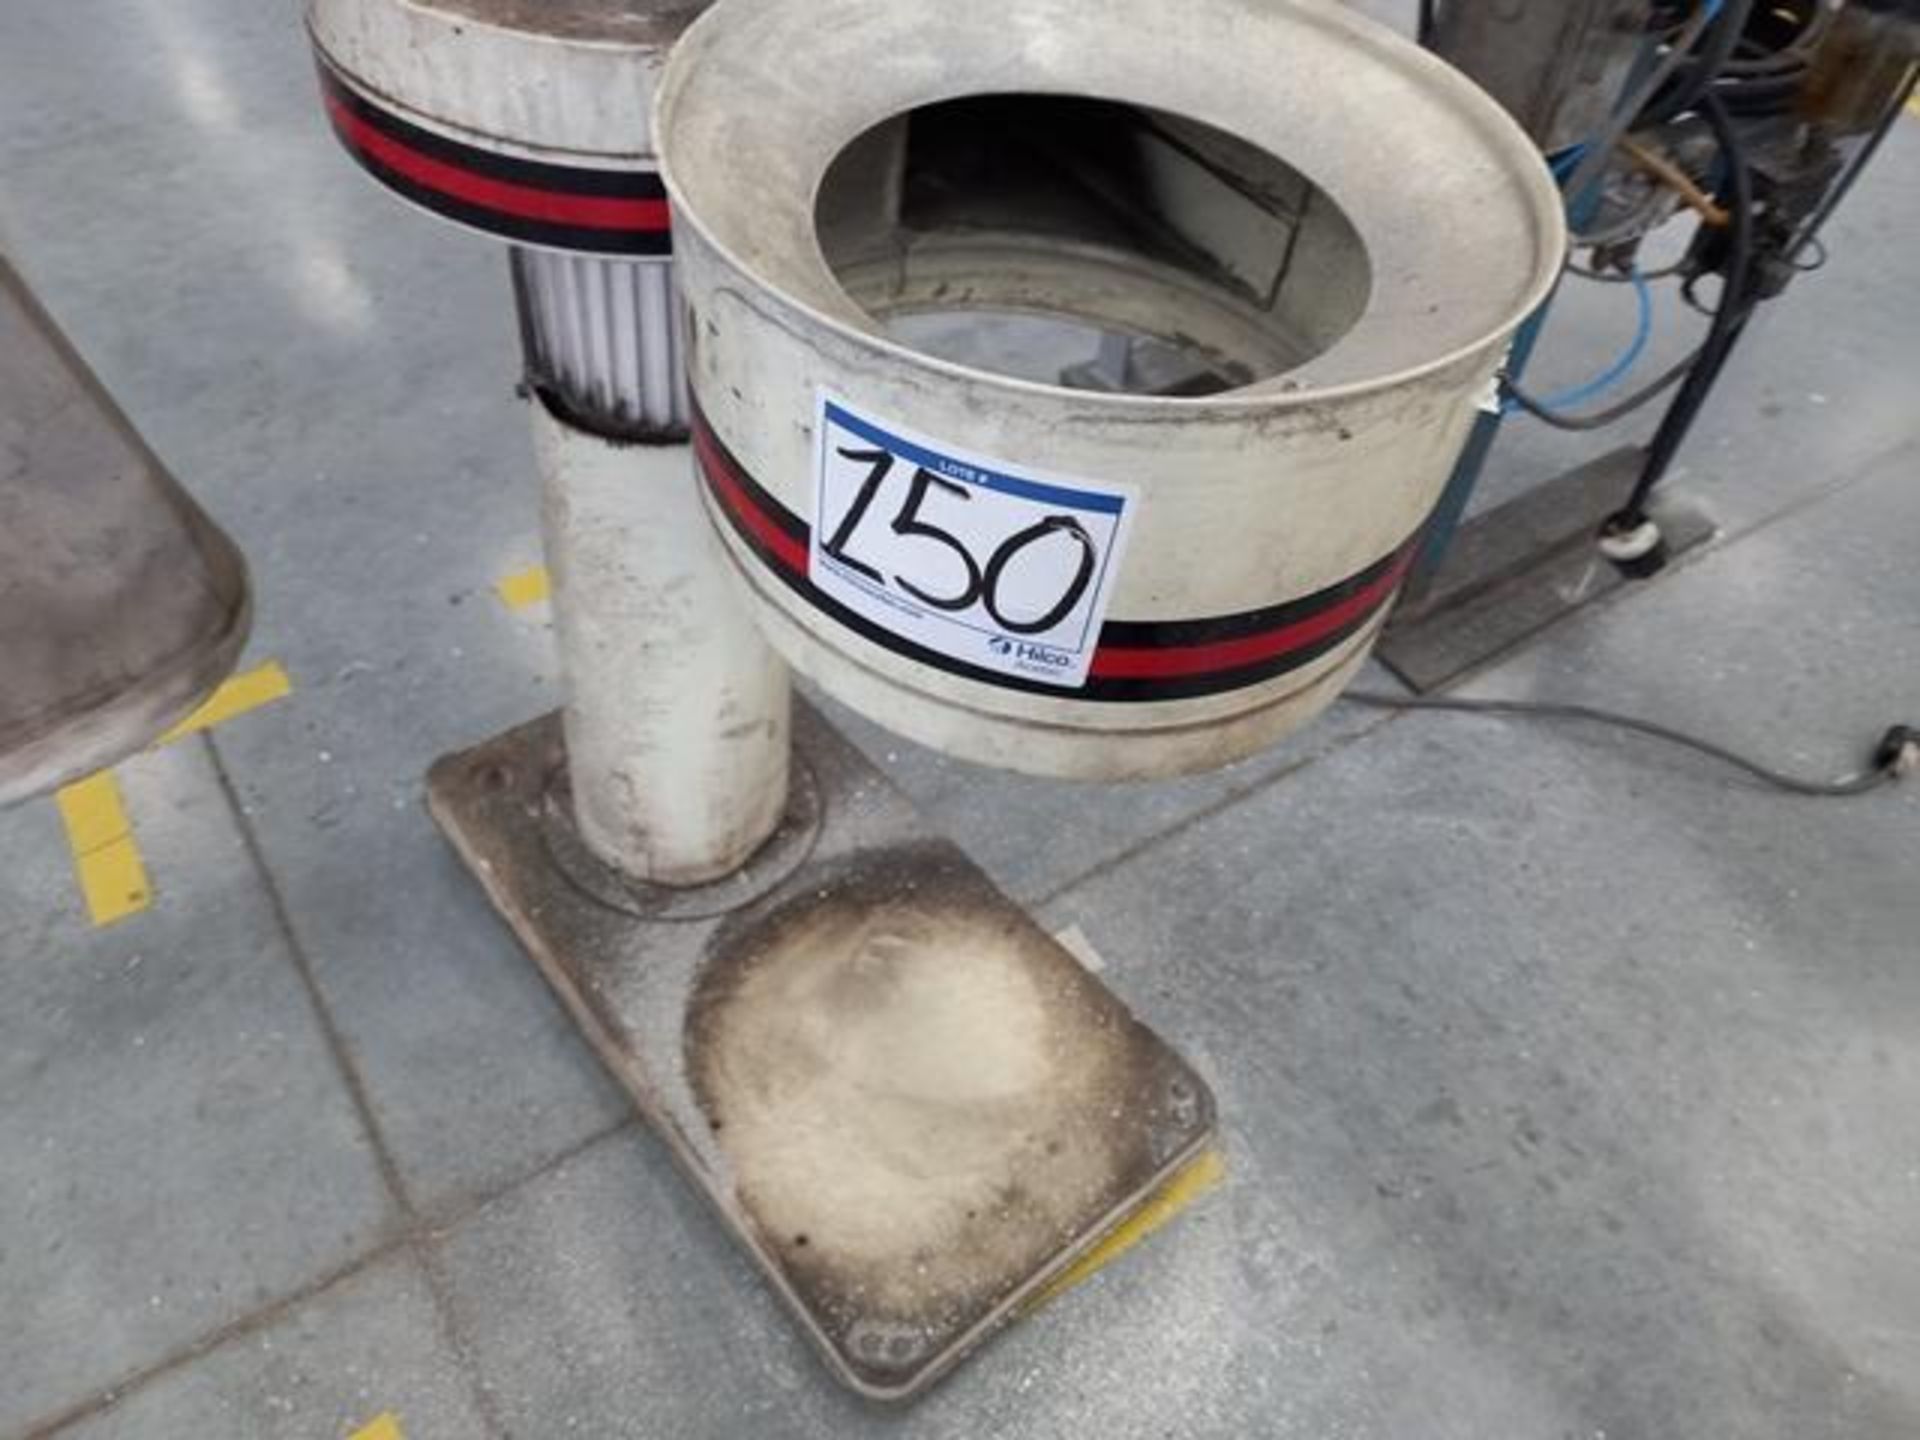 Kufo 6506 Dust Collector: 5" X 4-1/2", Power Rating 1 HP (Tag: Huf15749) (Location: Cienega De